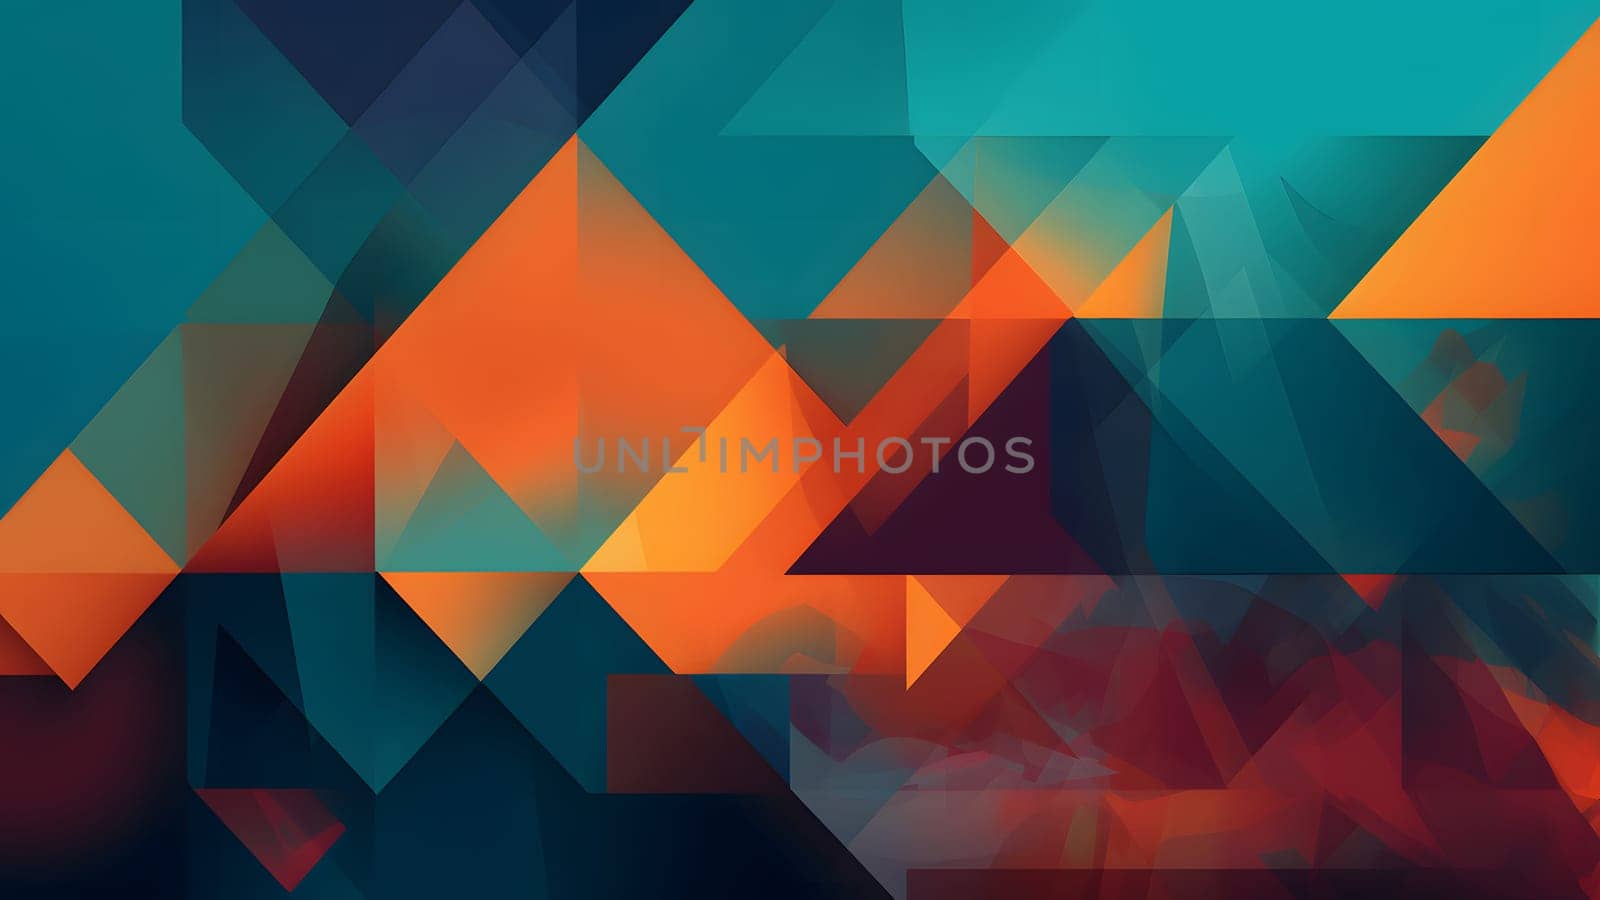 abstract plygonal teal-orange background and wallpaper. Not based on any actual person, scene or pattern.